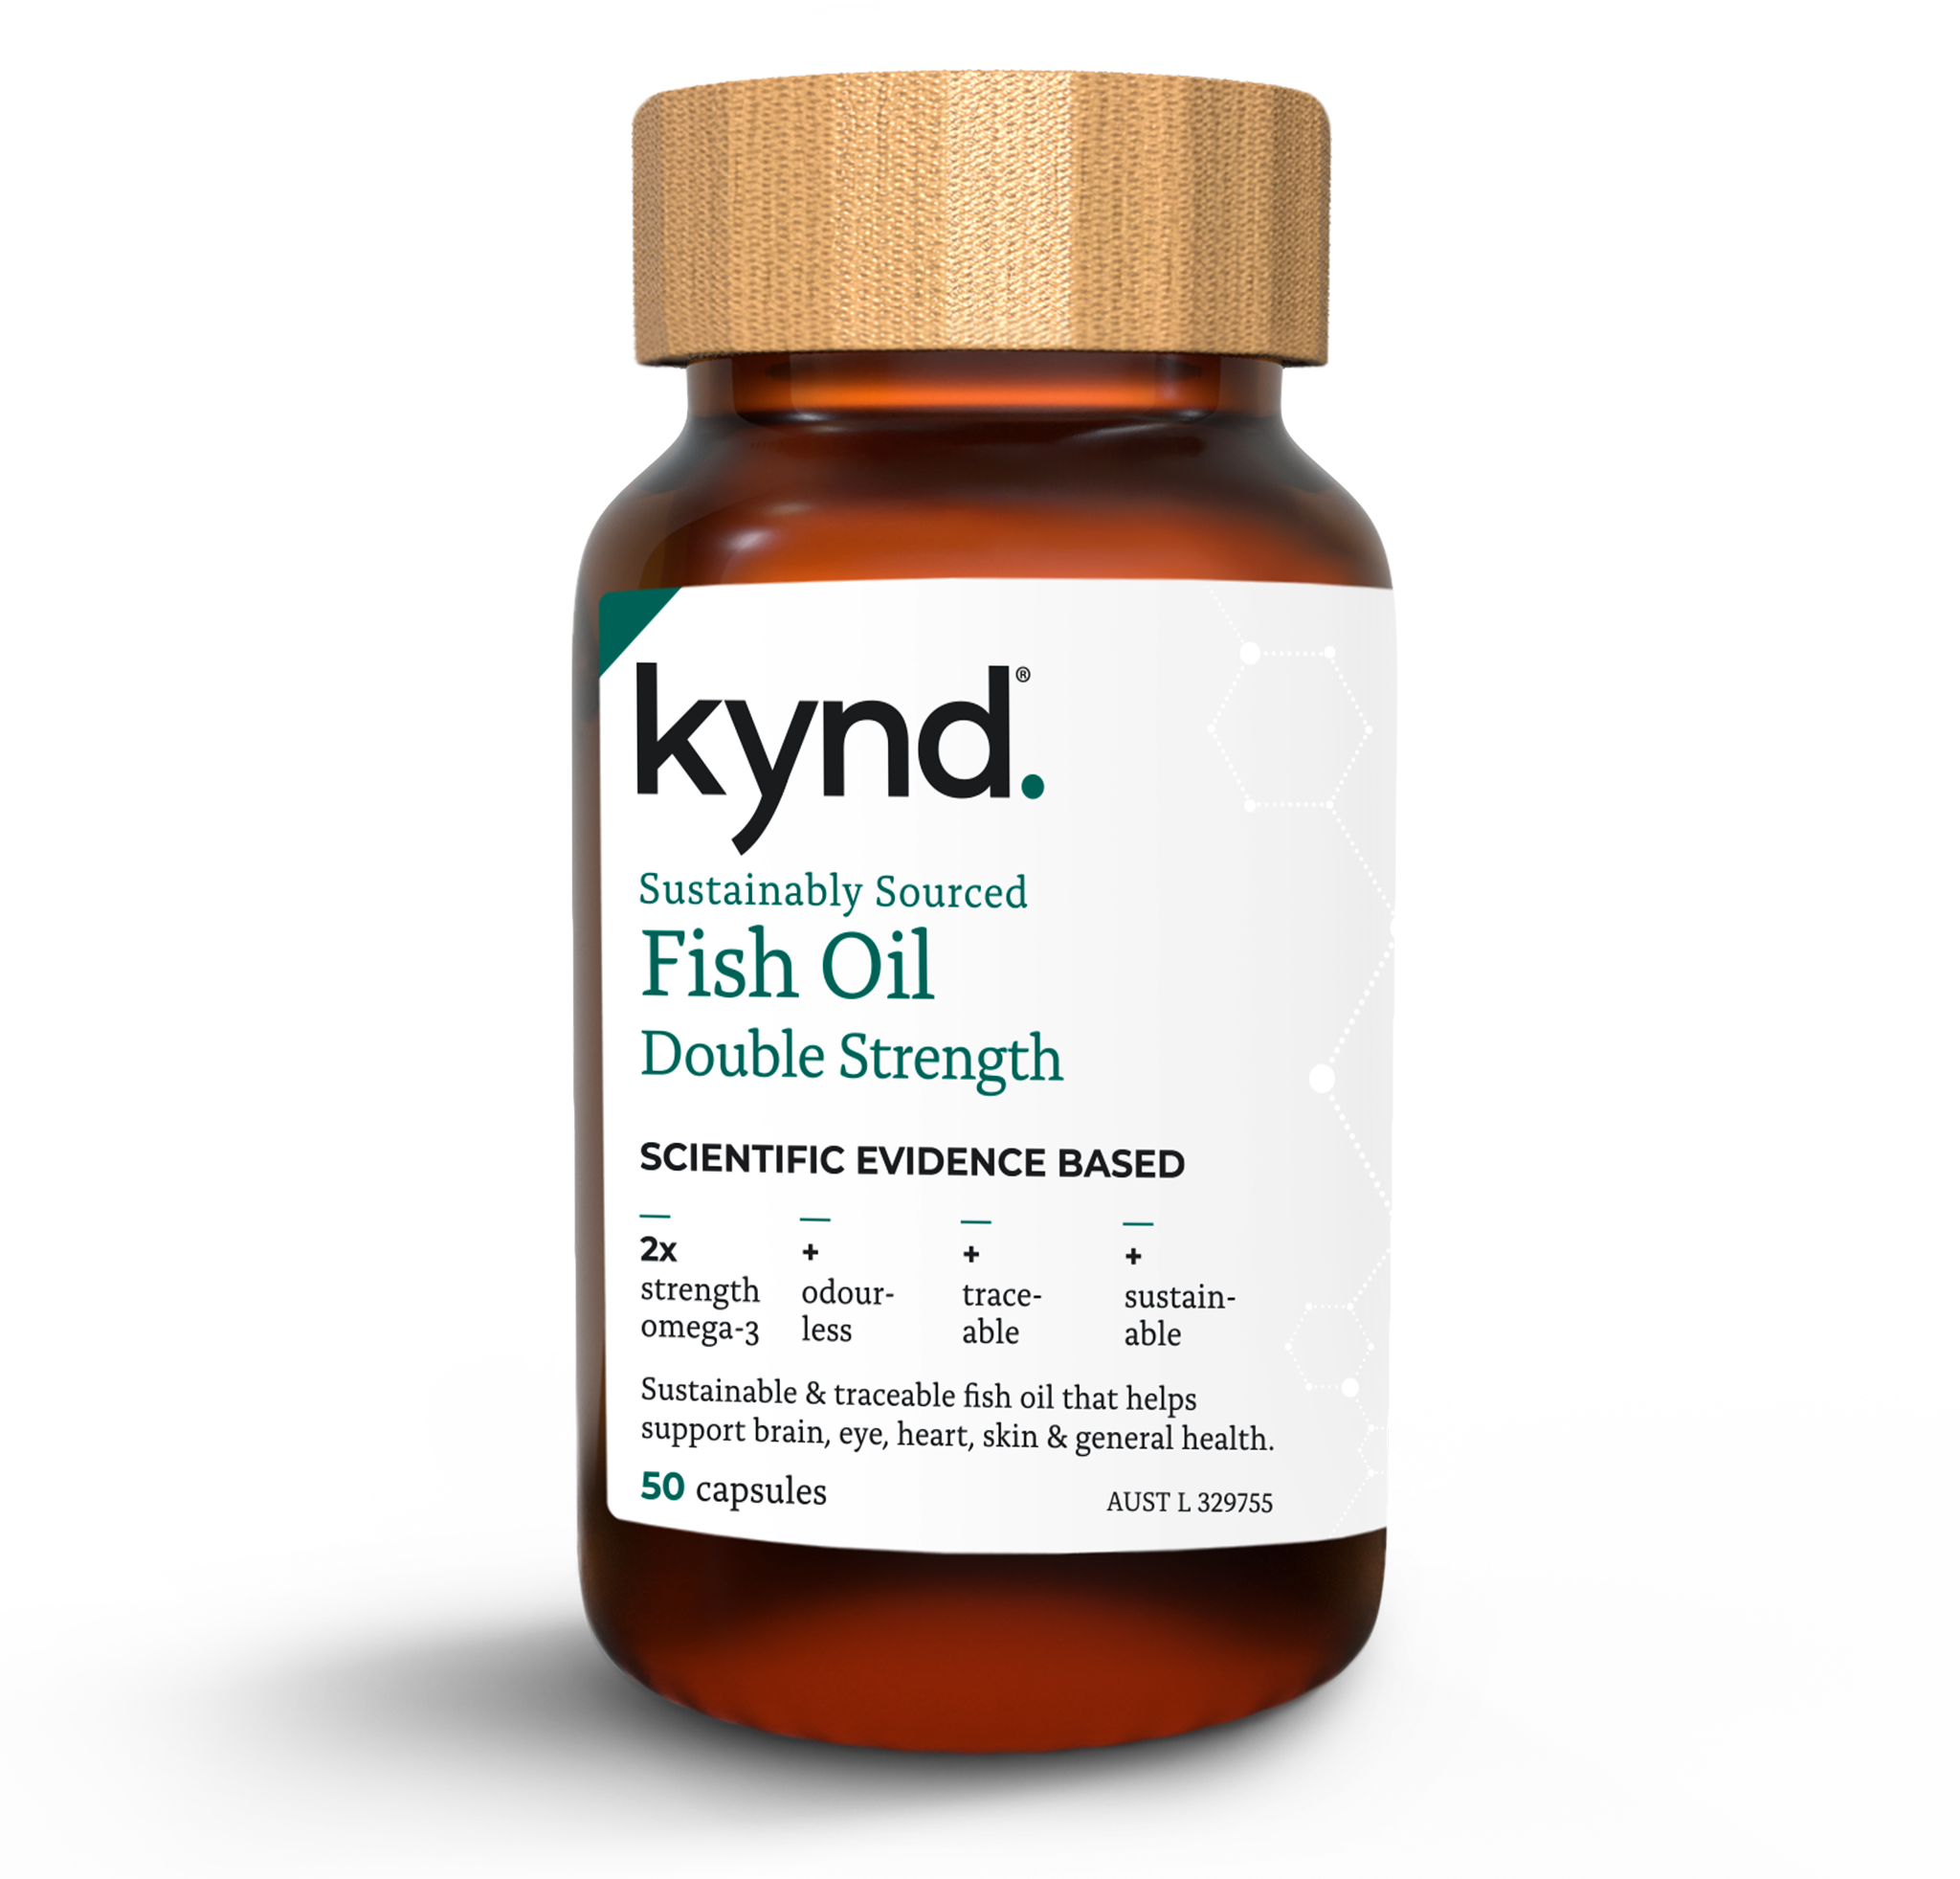 Kynd Sustainably Sourced Fish Oil Double Strength | Supplement | Scientific Evidence Based - Omega 3 - Brain, Eye, Heart Health